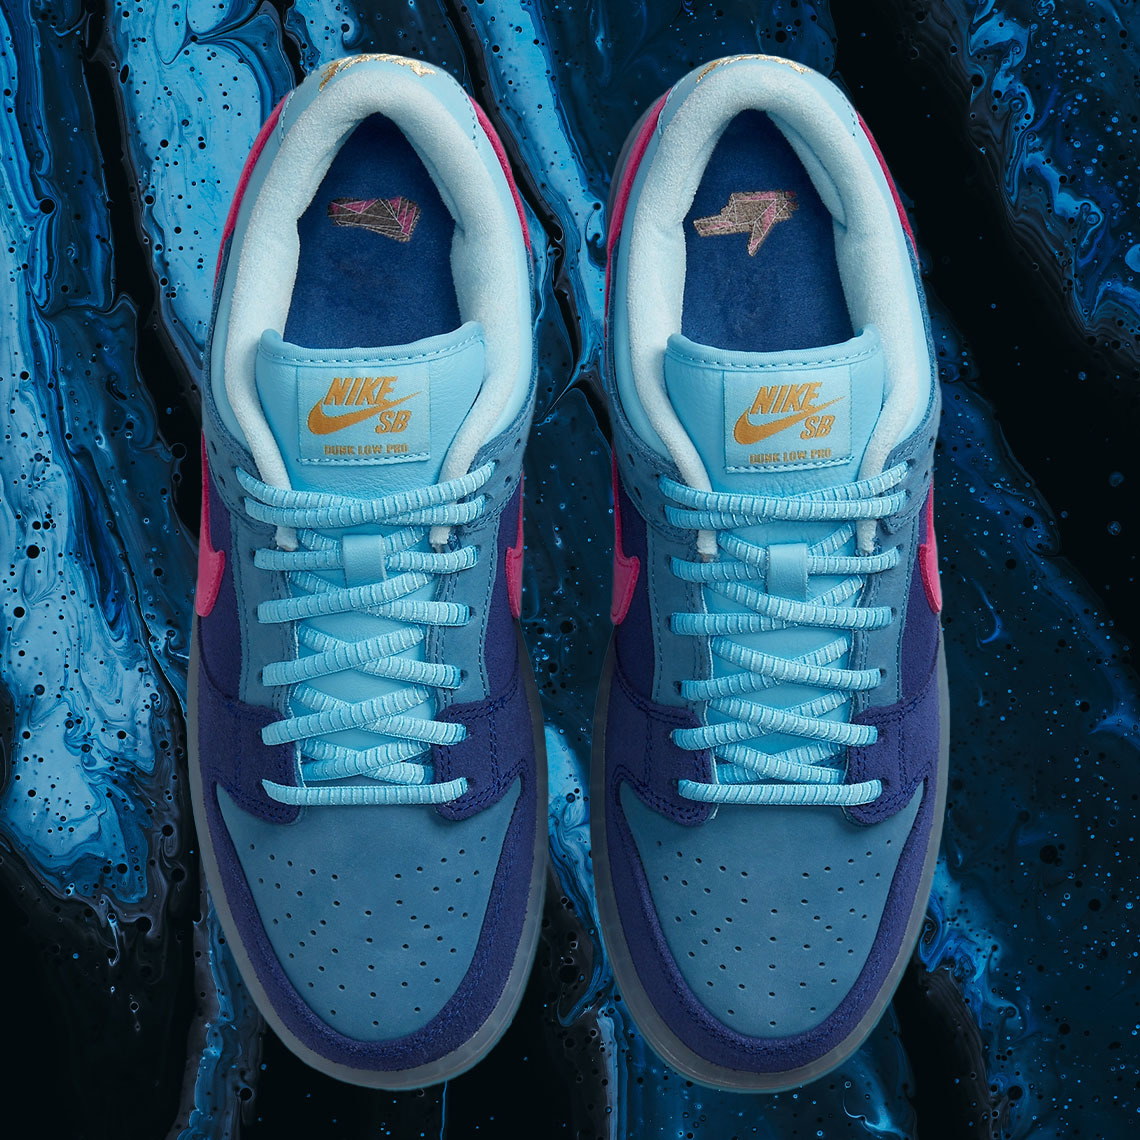 The Run the Jewels x Nike SB Dunks Have a Release Date